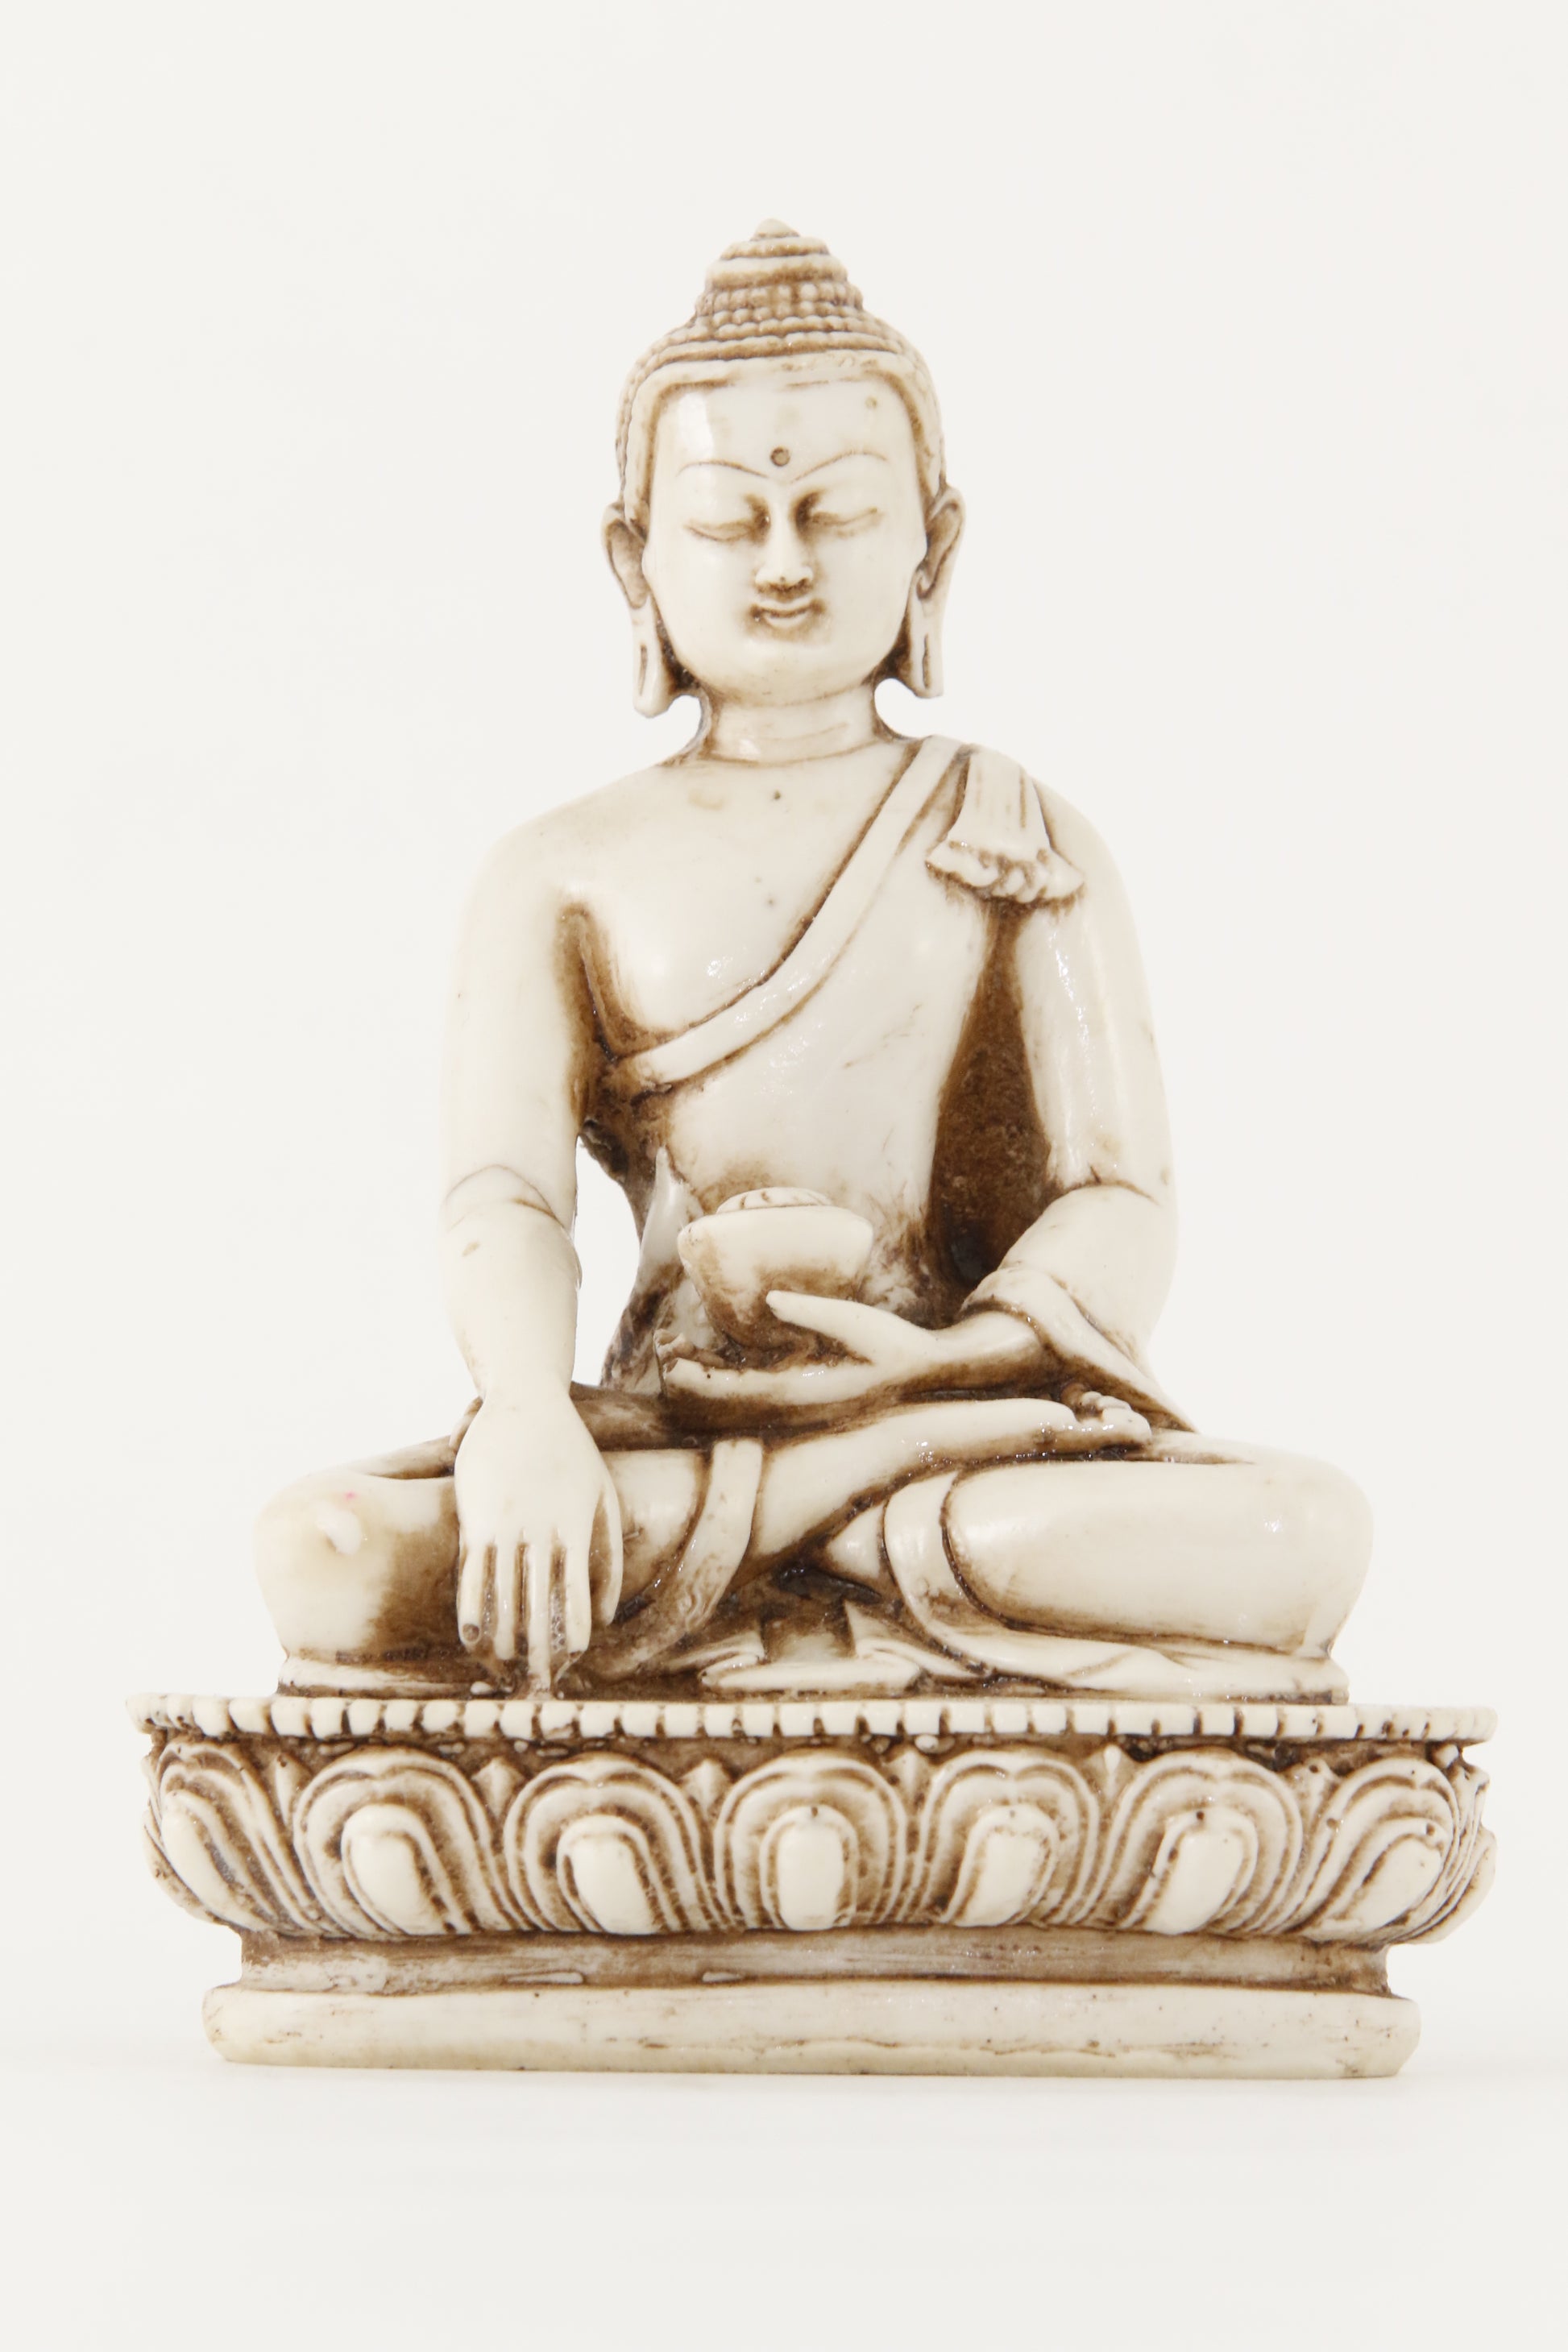 EARTH TOUCHING BUDDHA STATUE OFF-WHITE MEDIUM SIZE FRONT VIEW